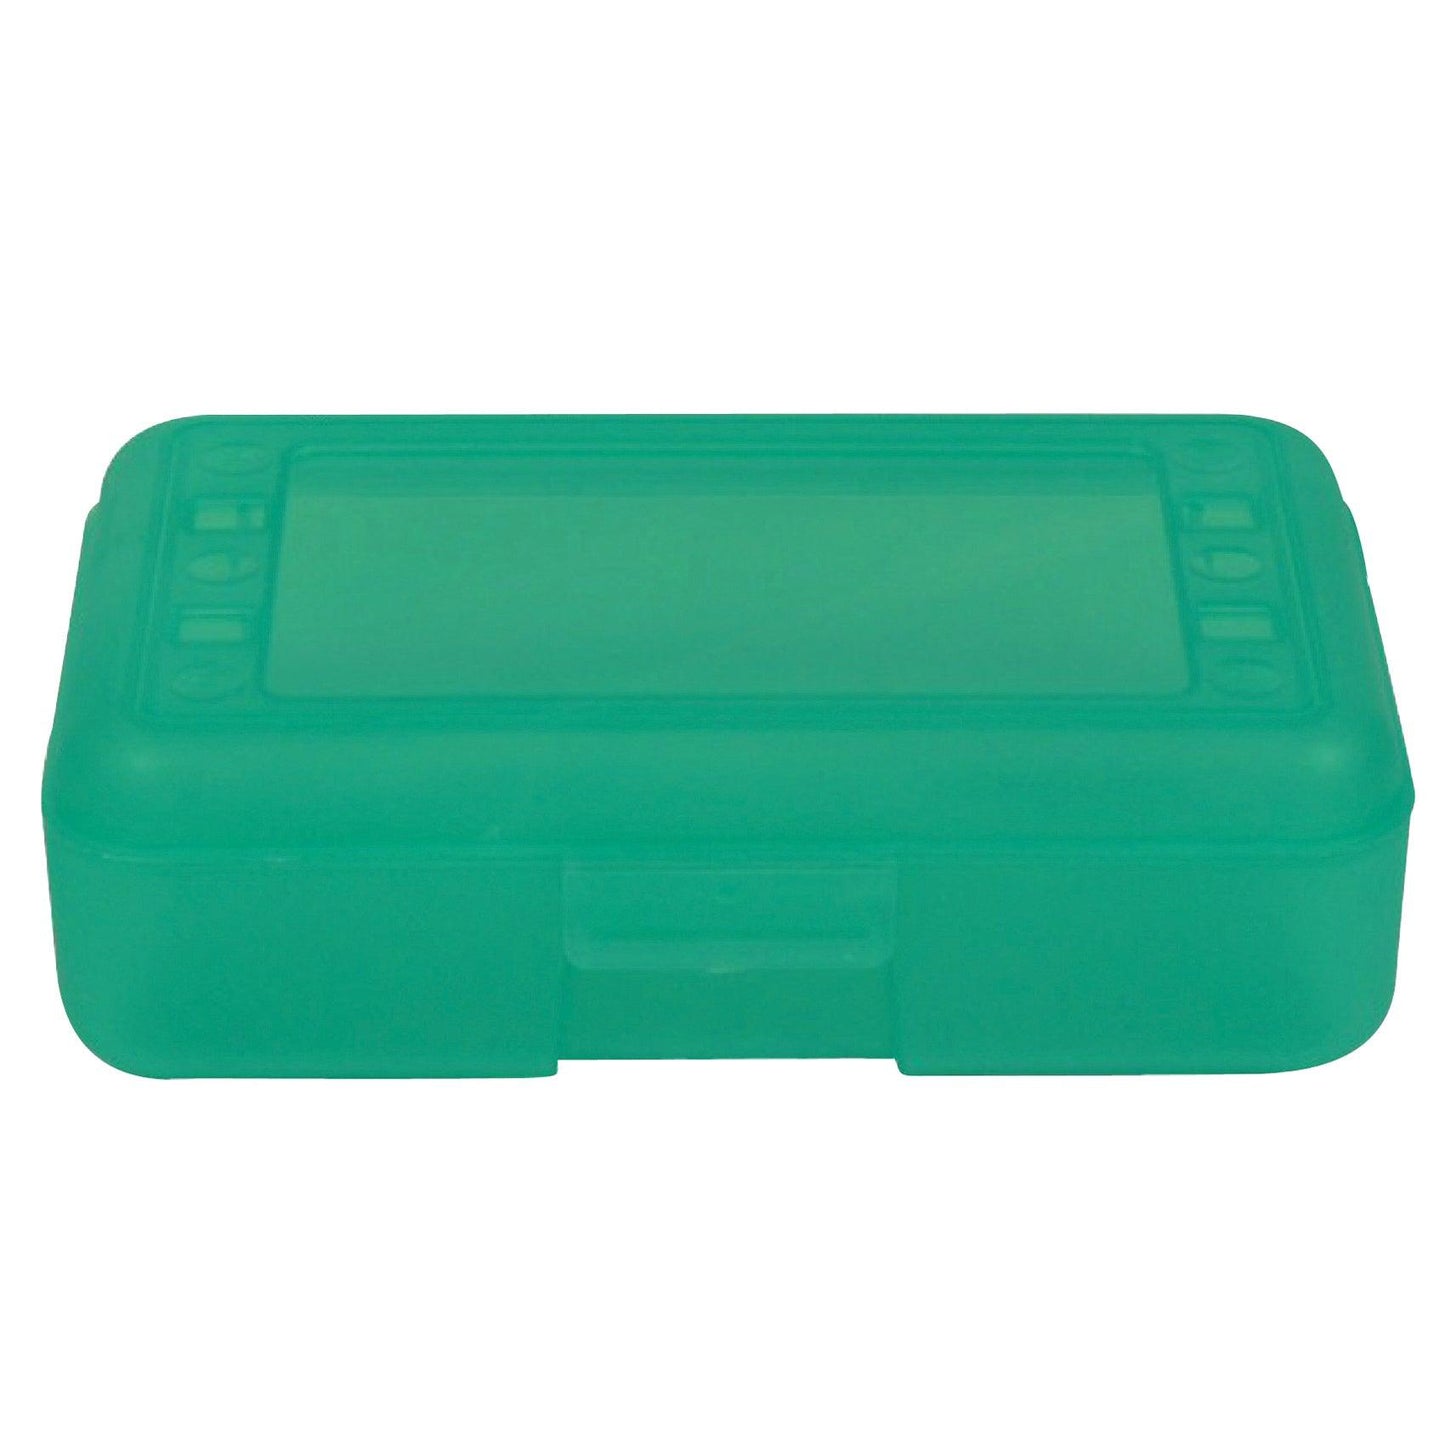 Pencil Box, Translucent Lime, Pack of 12 - Loomini